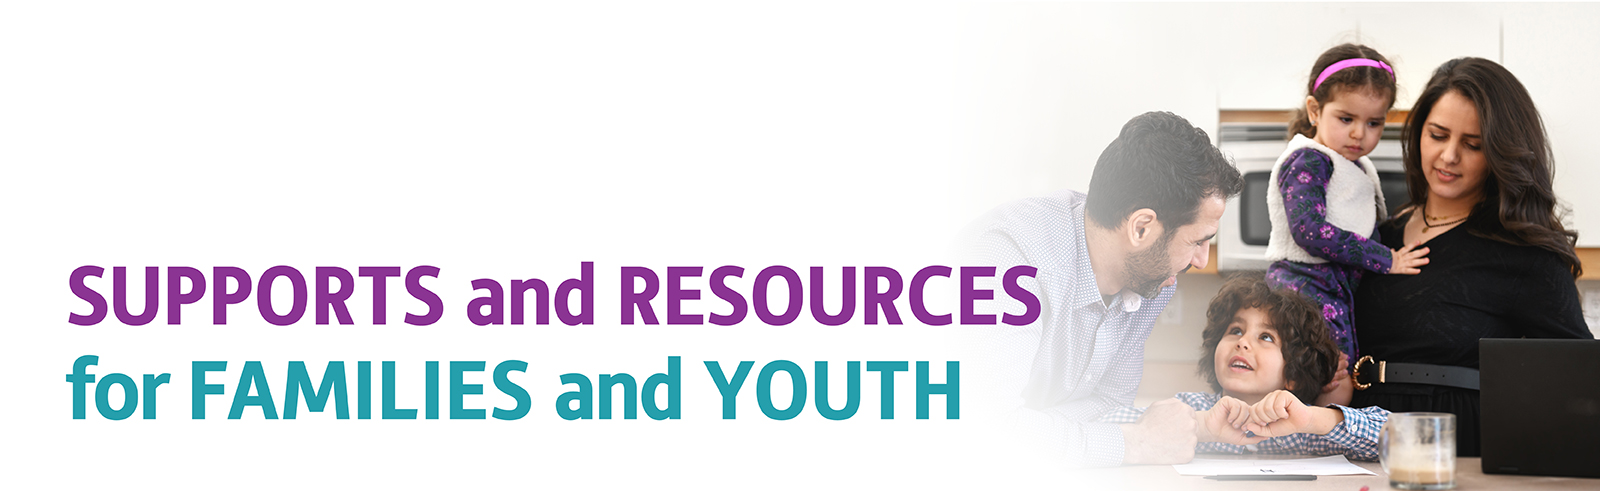 supports and resources for families and youth